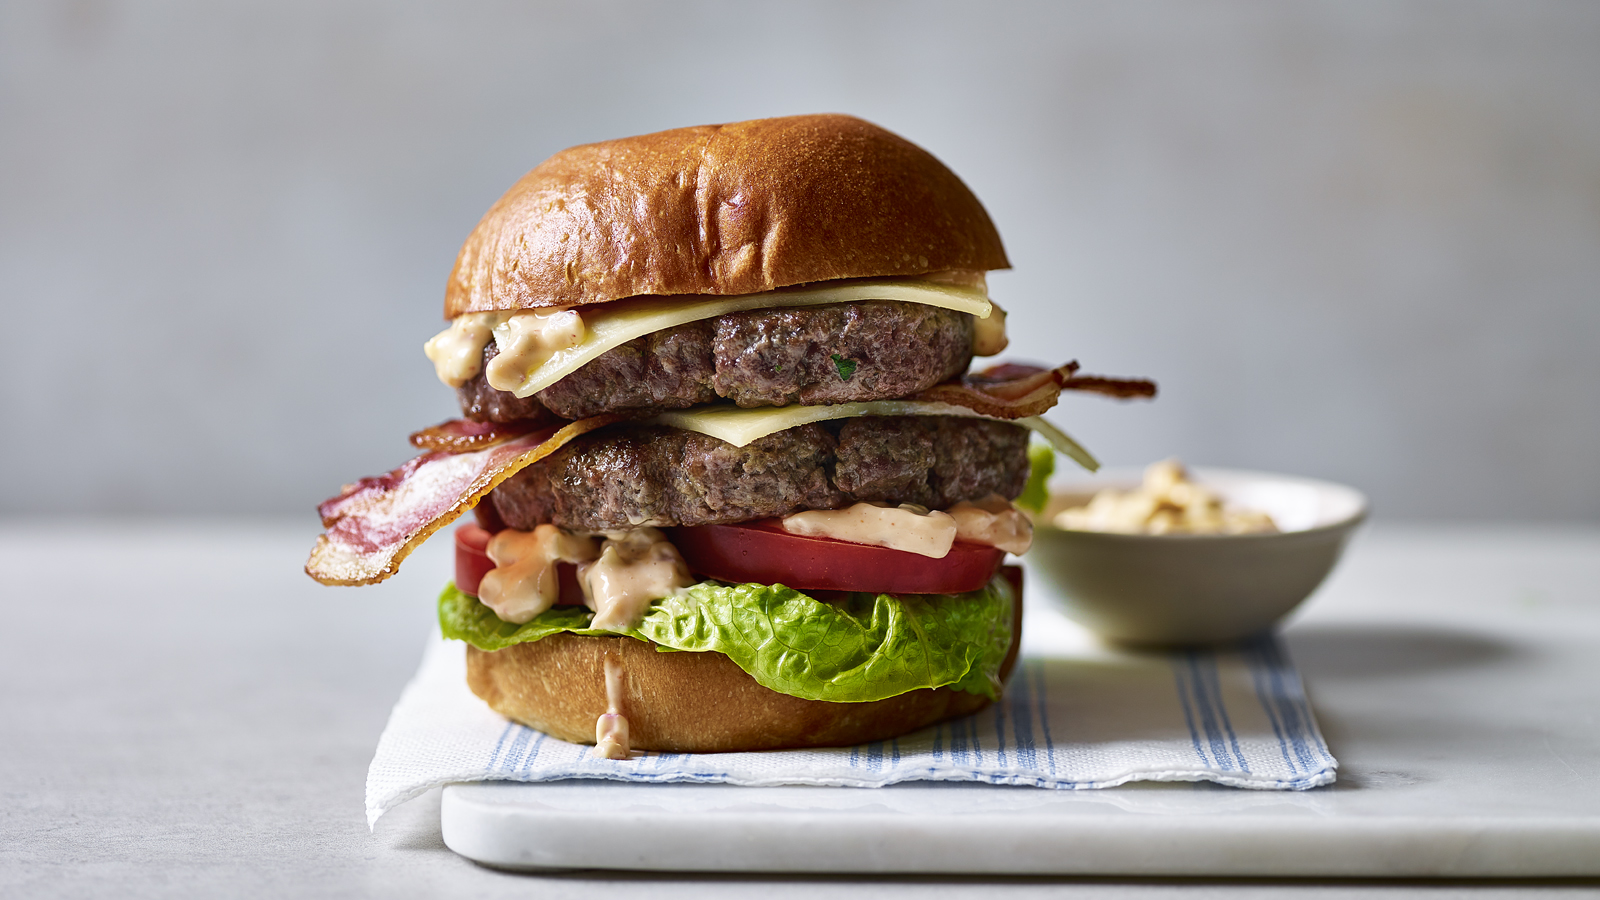 The ultimate homemade burger